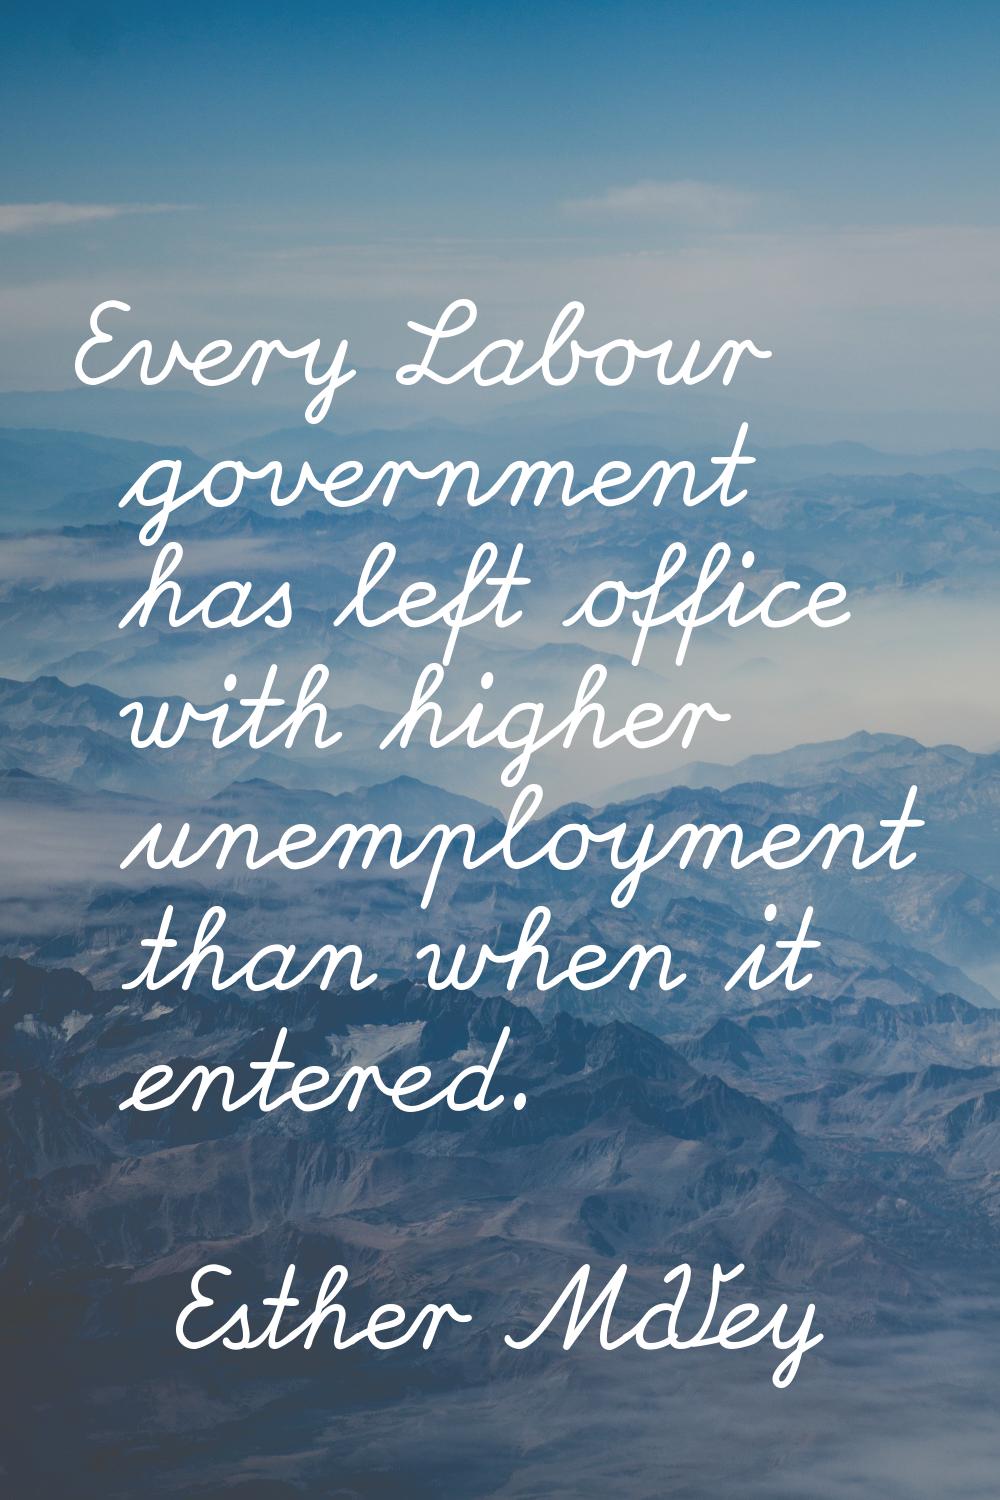 Every Labour government has left office with higher unemployment than when it entered.